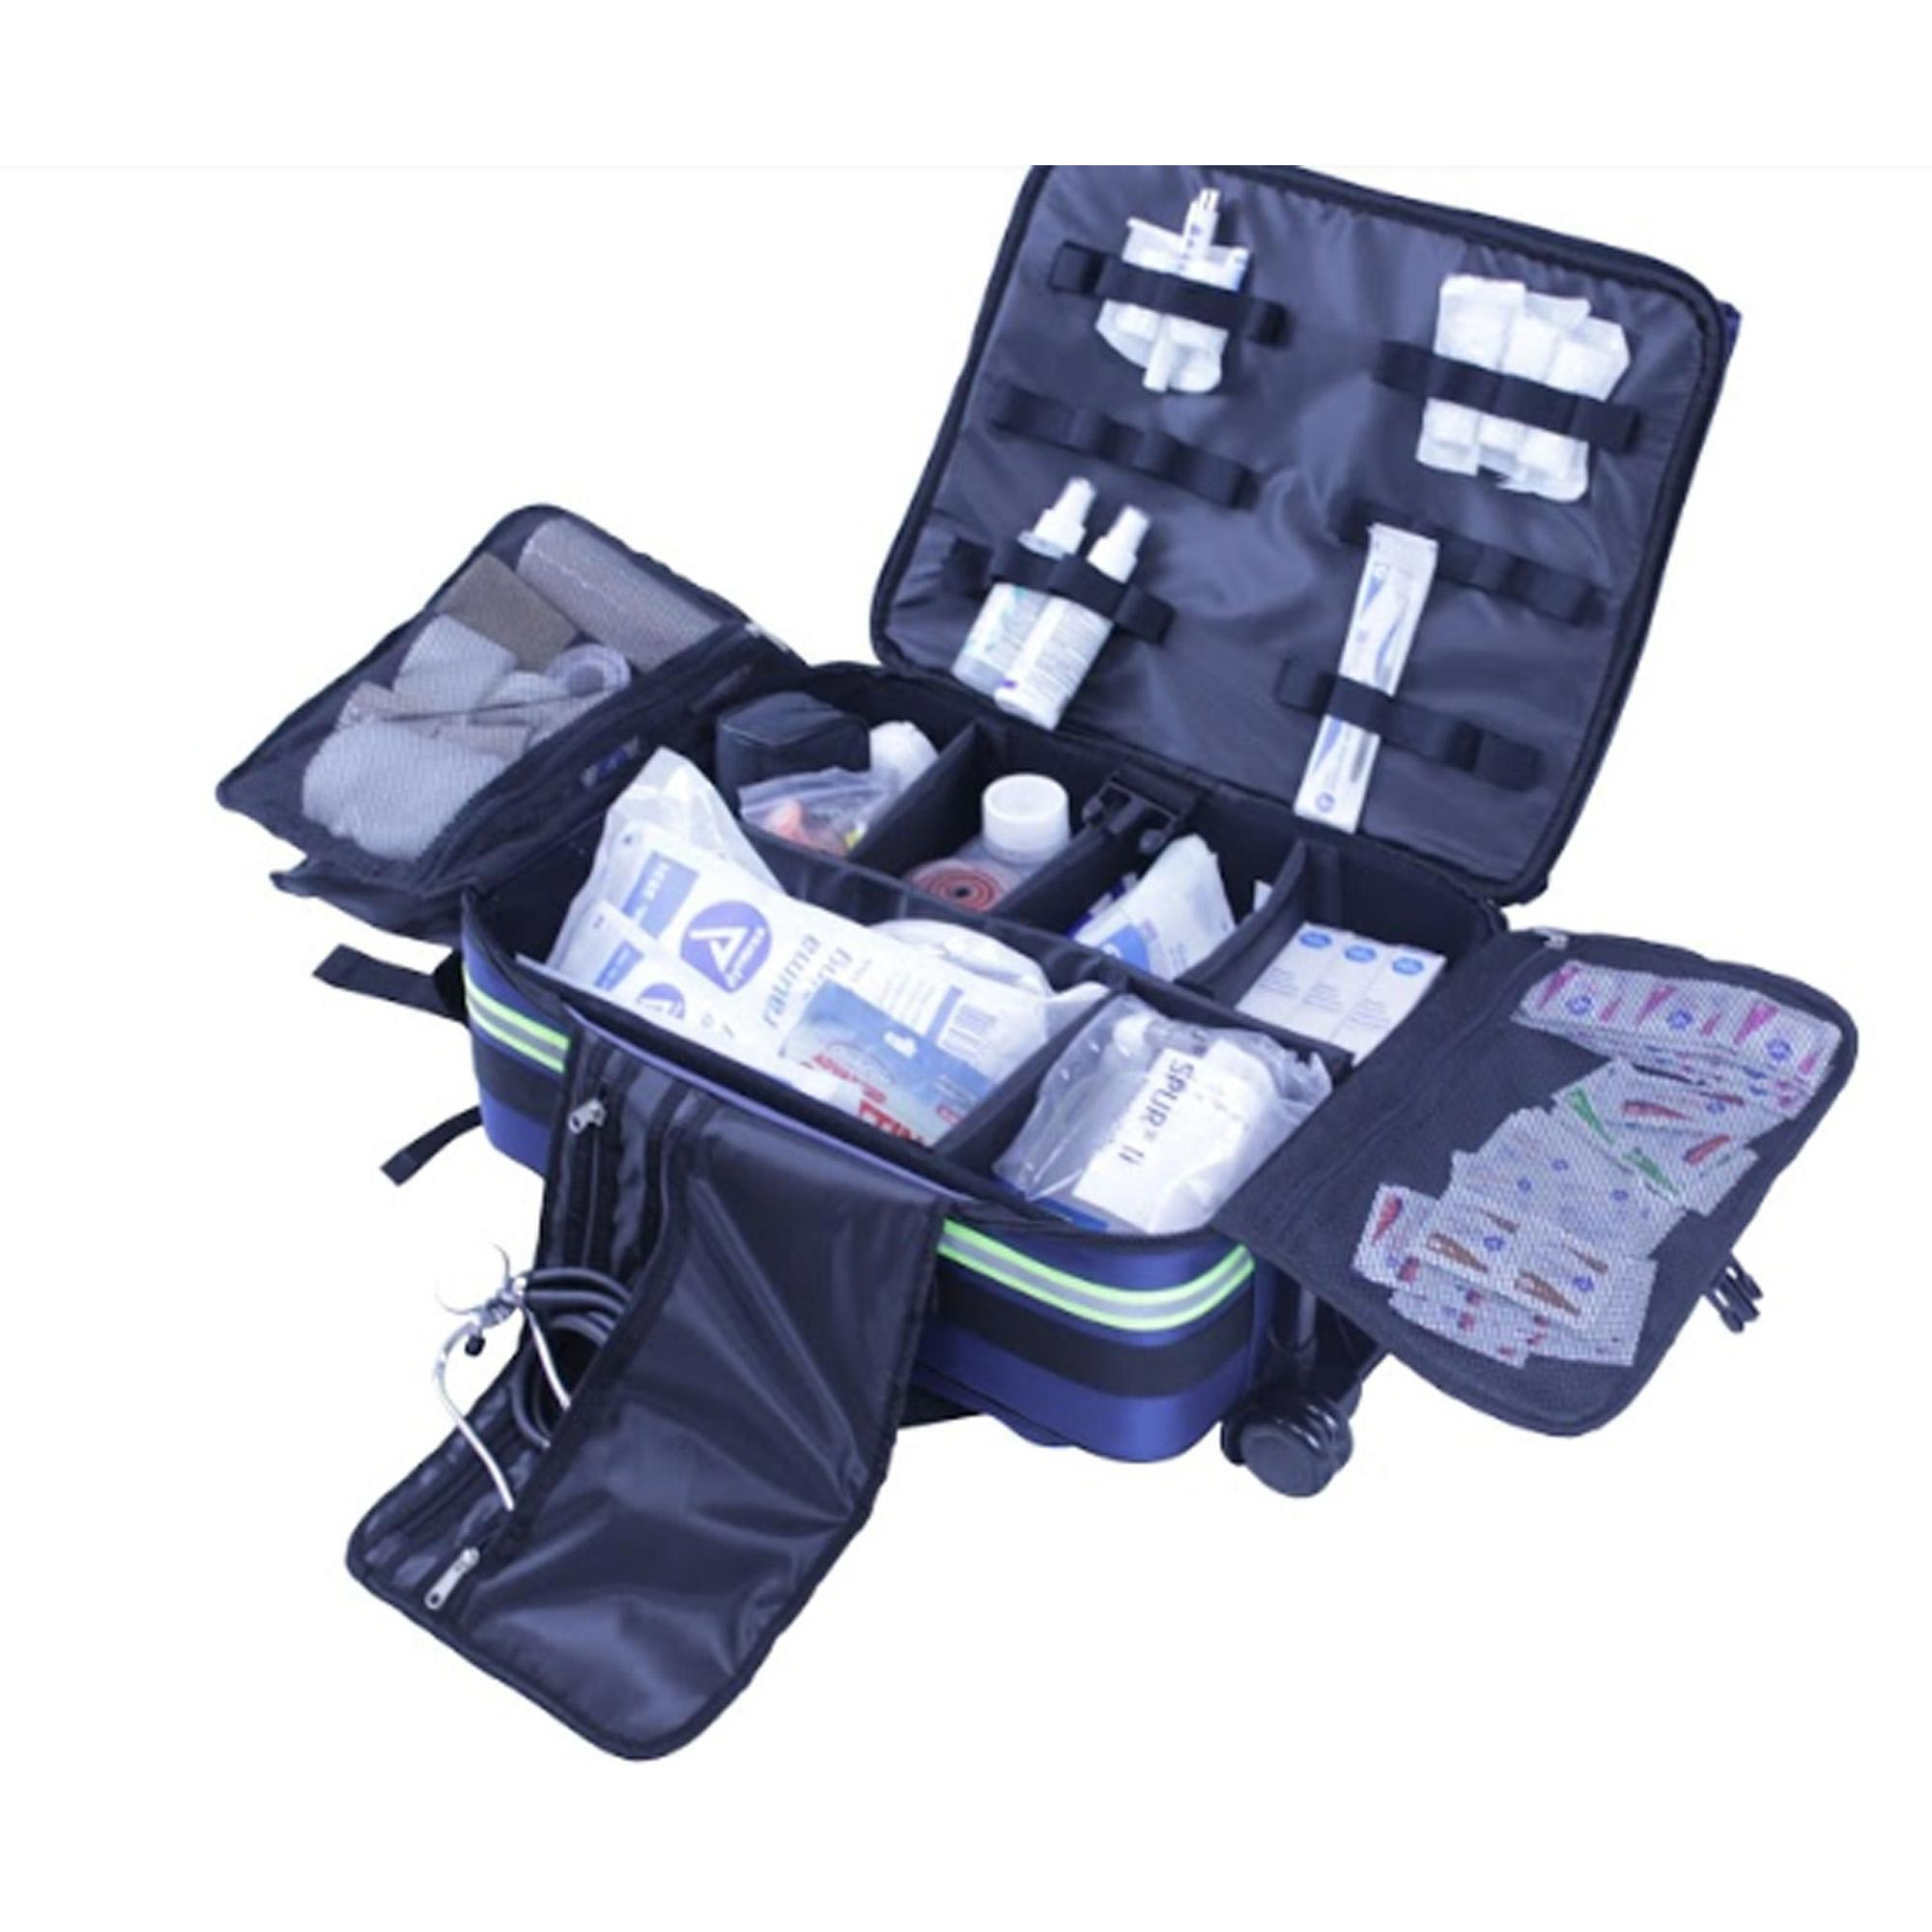 17" Navy Blue, Black, and Lime Green Outdoor Emergency Accessories Kemp USA Medical Supply Kit E alternate image